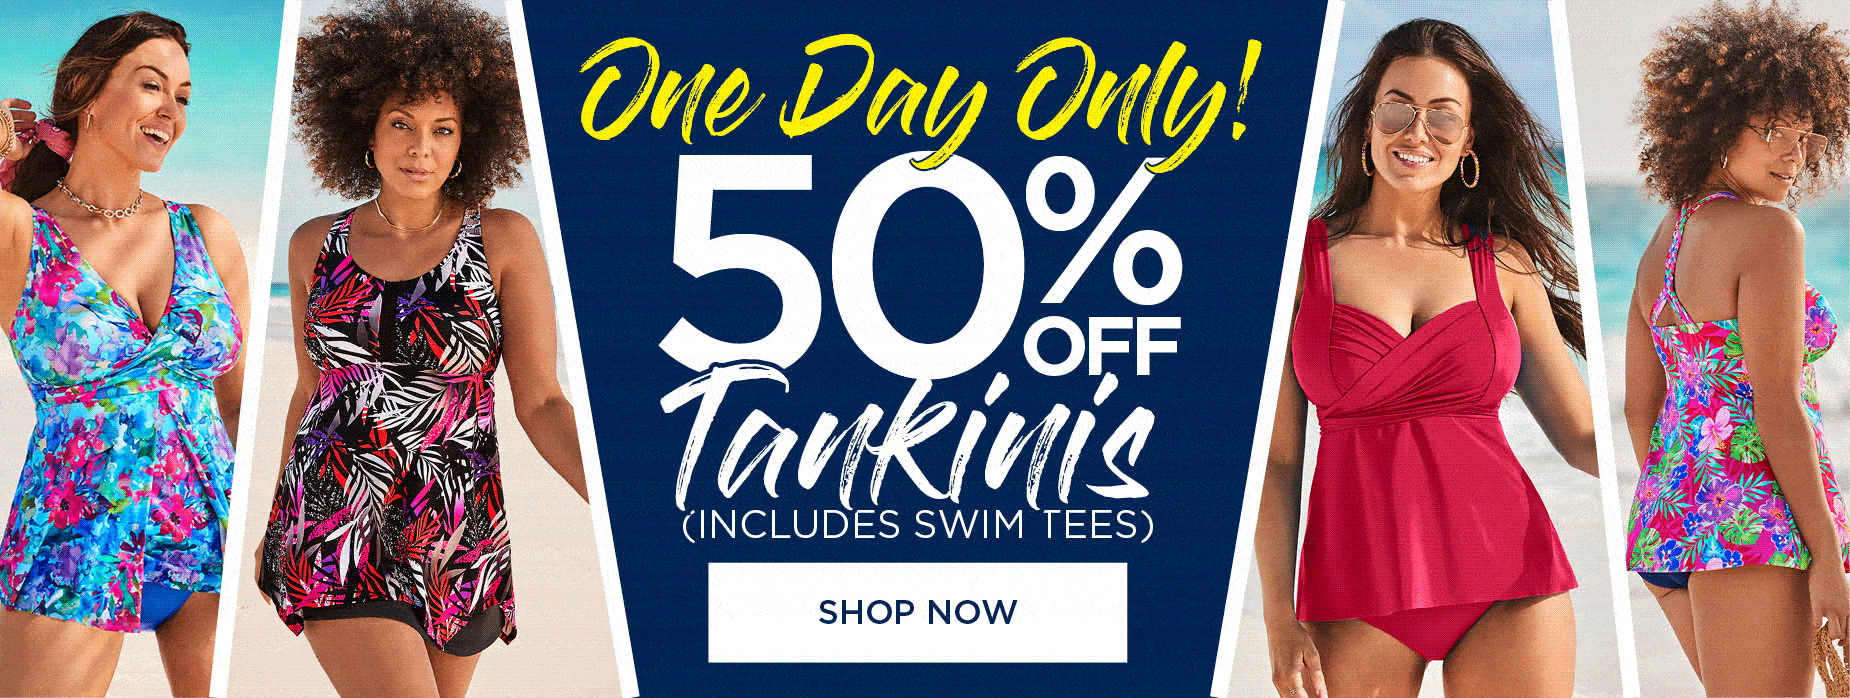 ONE DAY ONLY! 50% OFF TANKINS & SWIM TEES